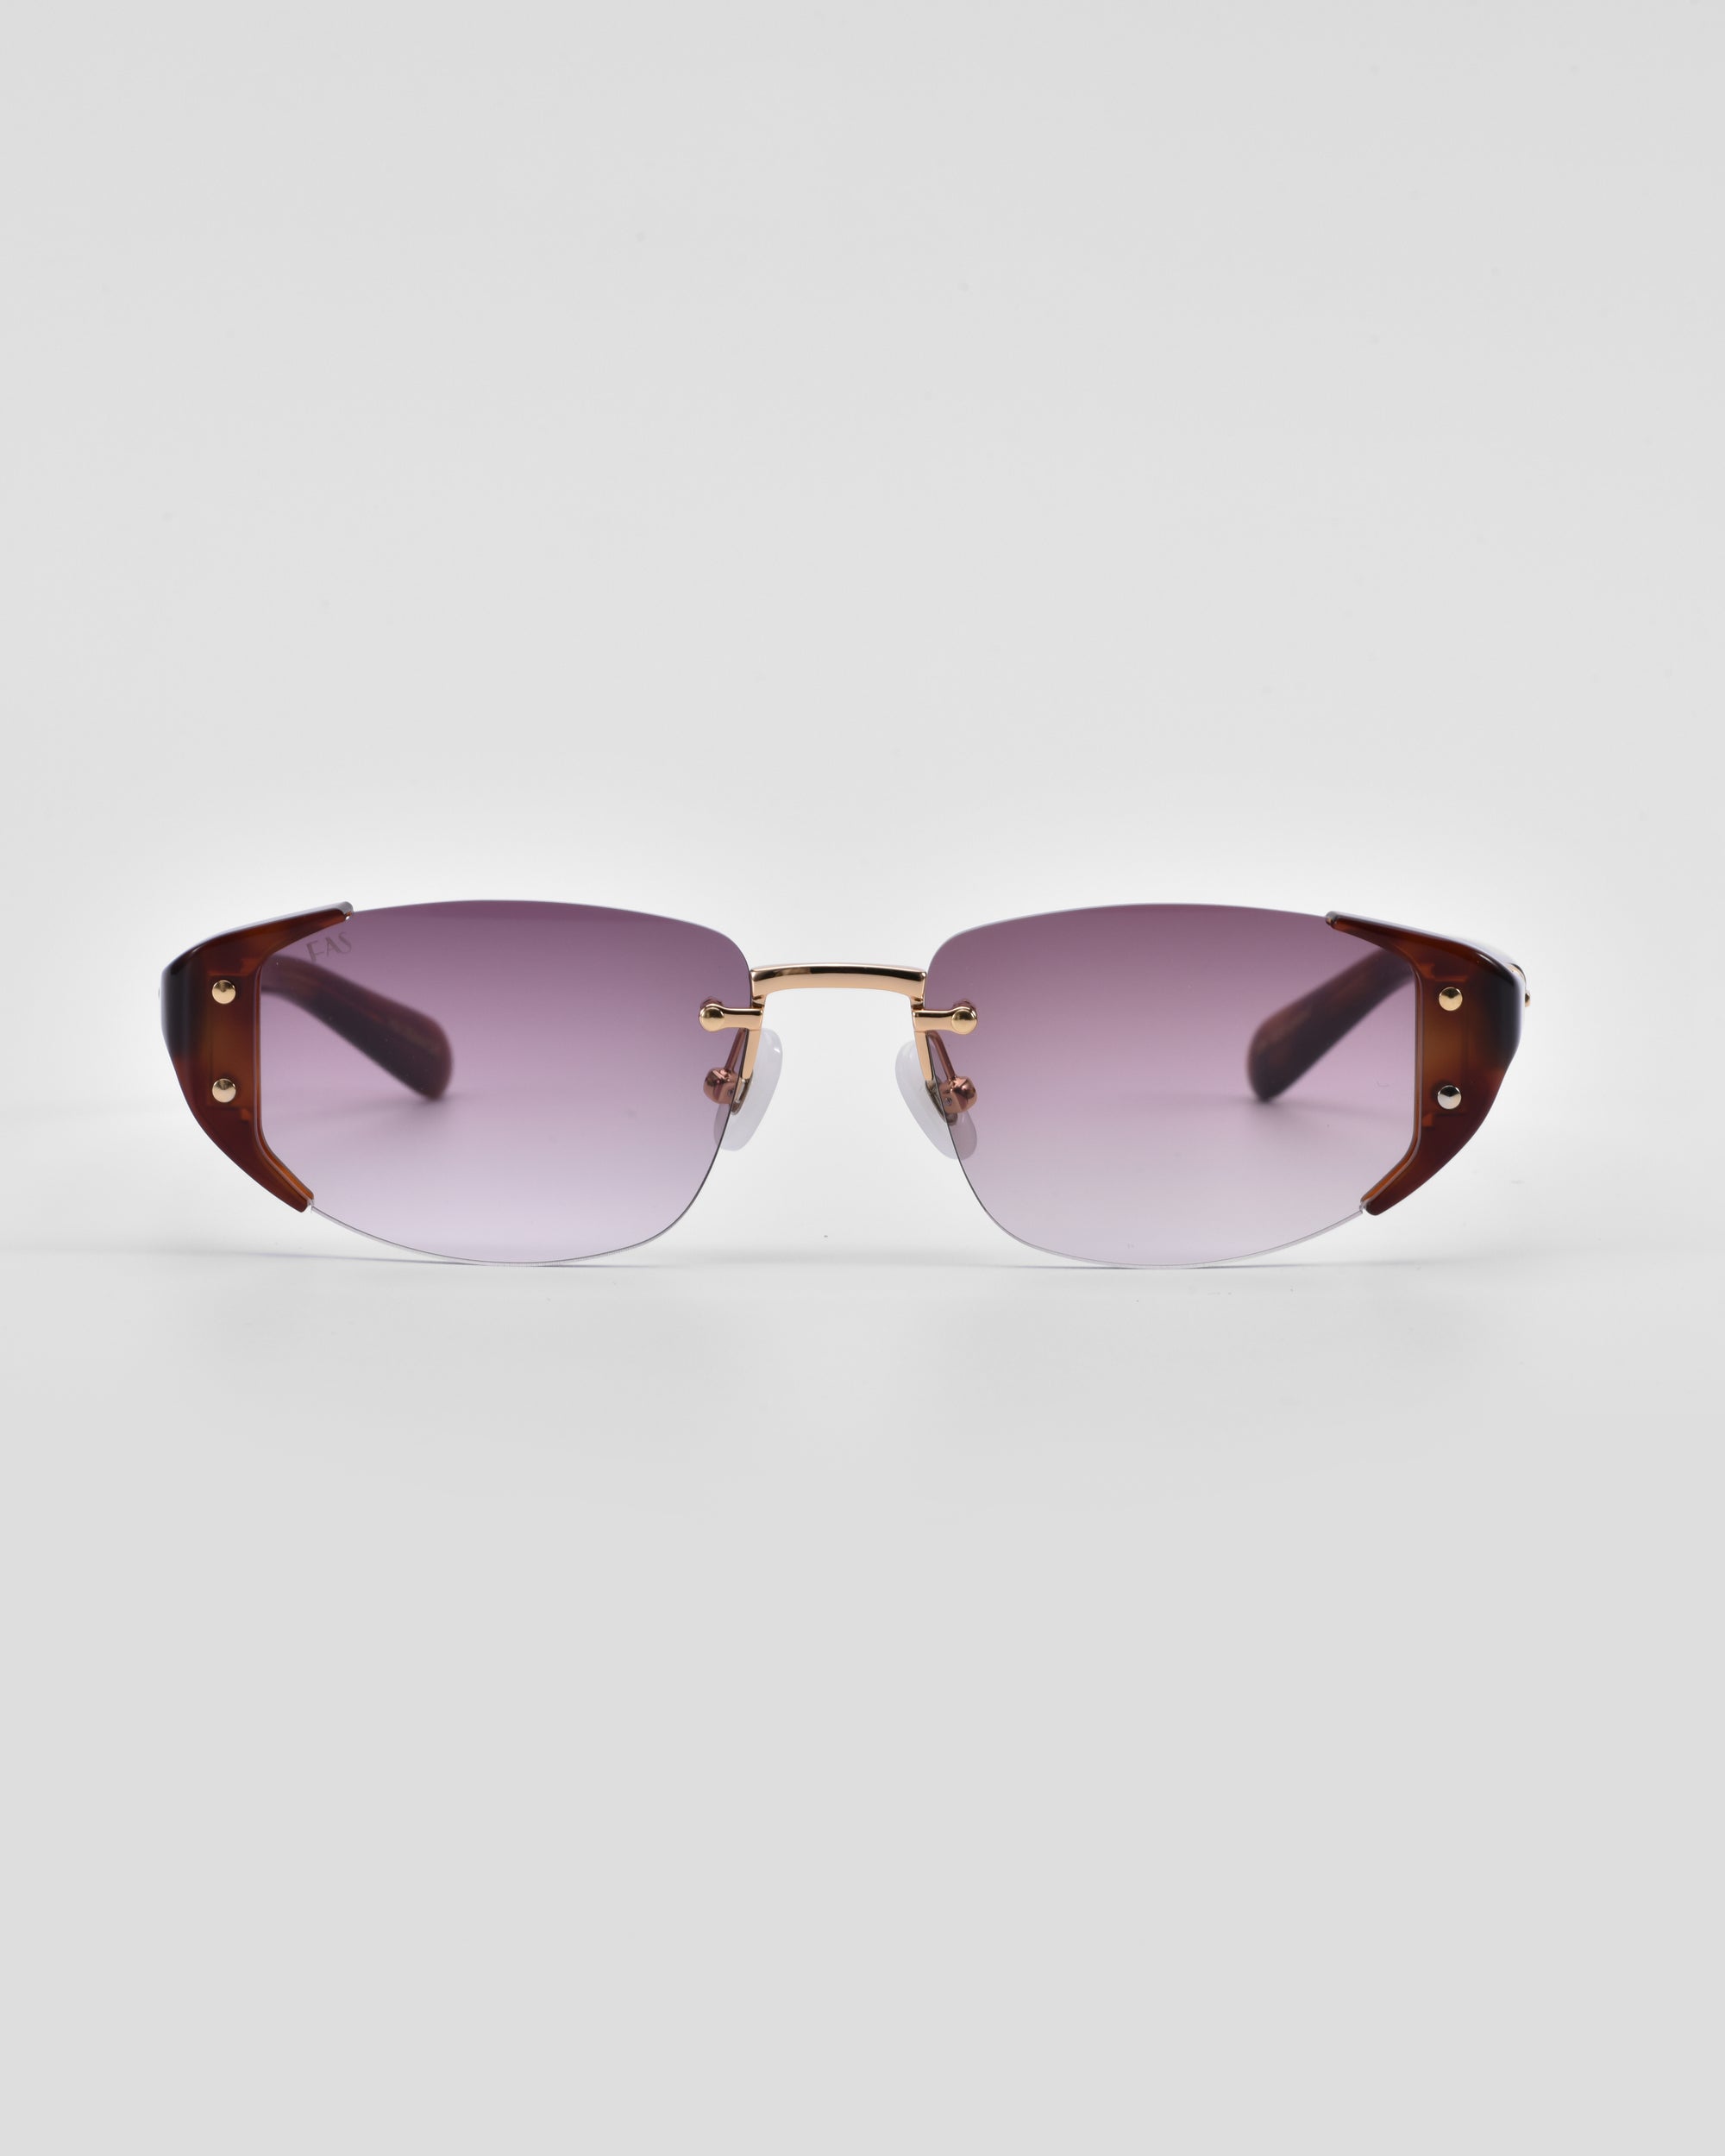 A pair of Harbour sunglasses with semi-rimless, rectangular, purple-tinted lenses by For Art's Sake®. Featuring brown, wide temples with metallic accents and a thin, 18 karat gold-plated bridge, the retro-inspired design stands out against a plain white background.